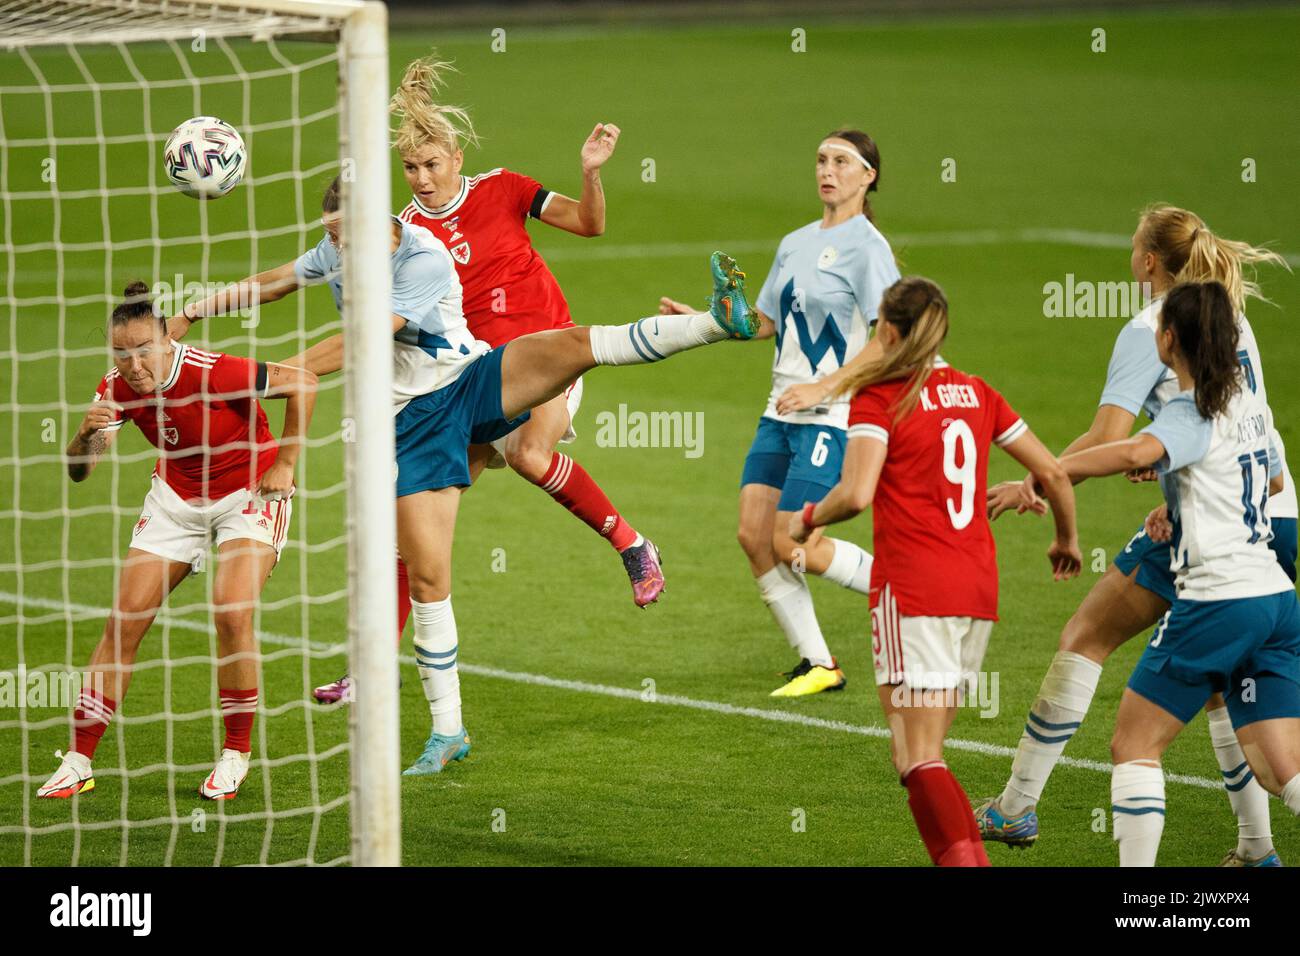 Cardiff, UK. 6th Sep, 2022. Gemma Evans of Wales heads towards goal during the Wales v Slovenia Women's World Cup Qualification match. Credit: Gruffydd Thomas/Alamy Live News Stock Photo